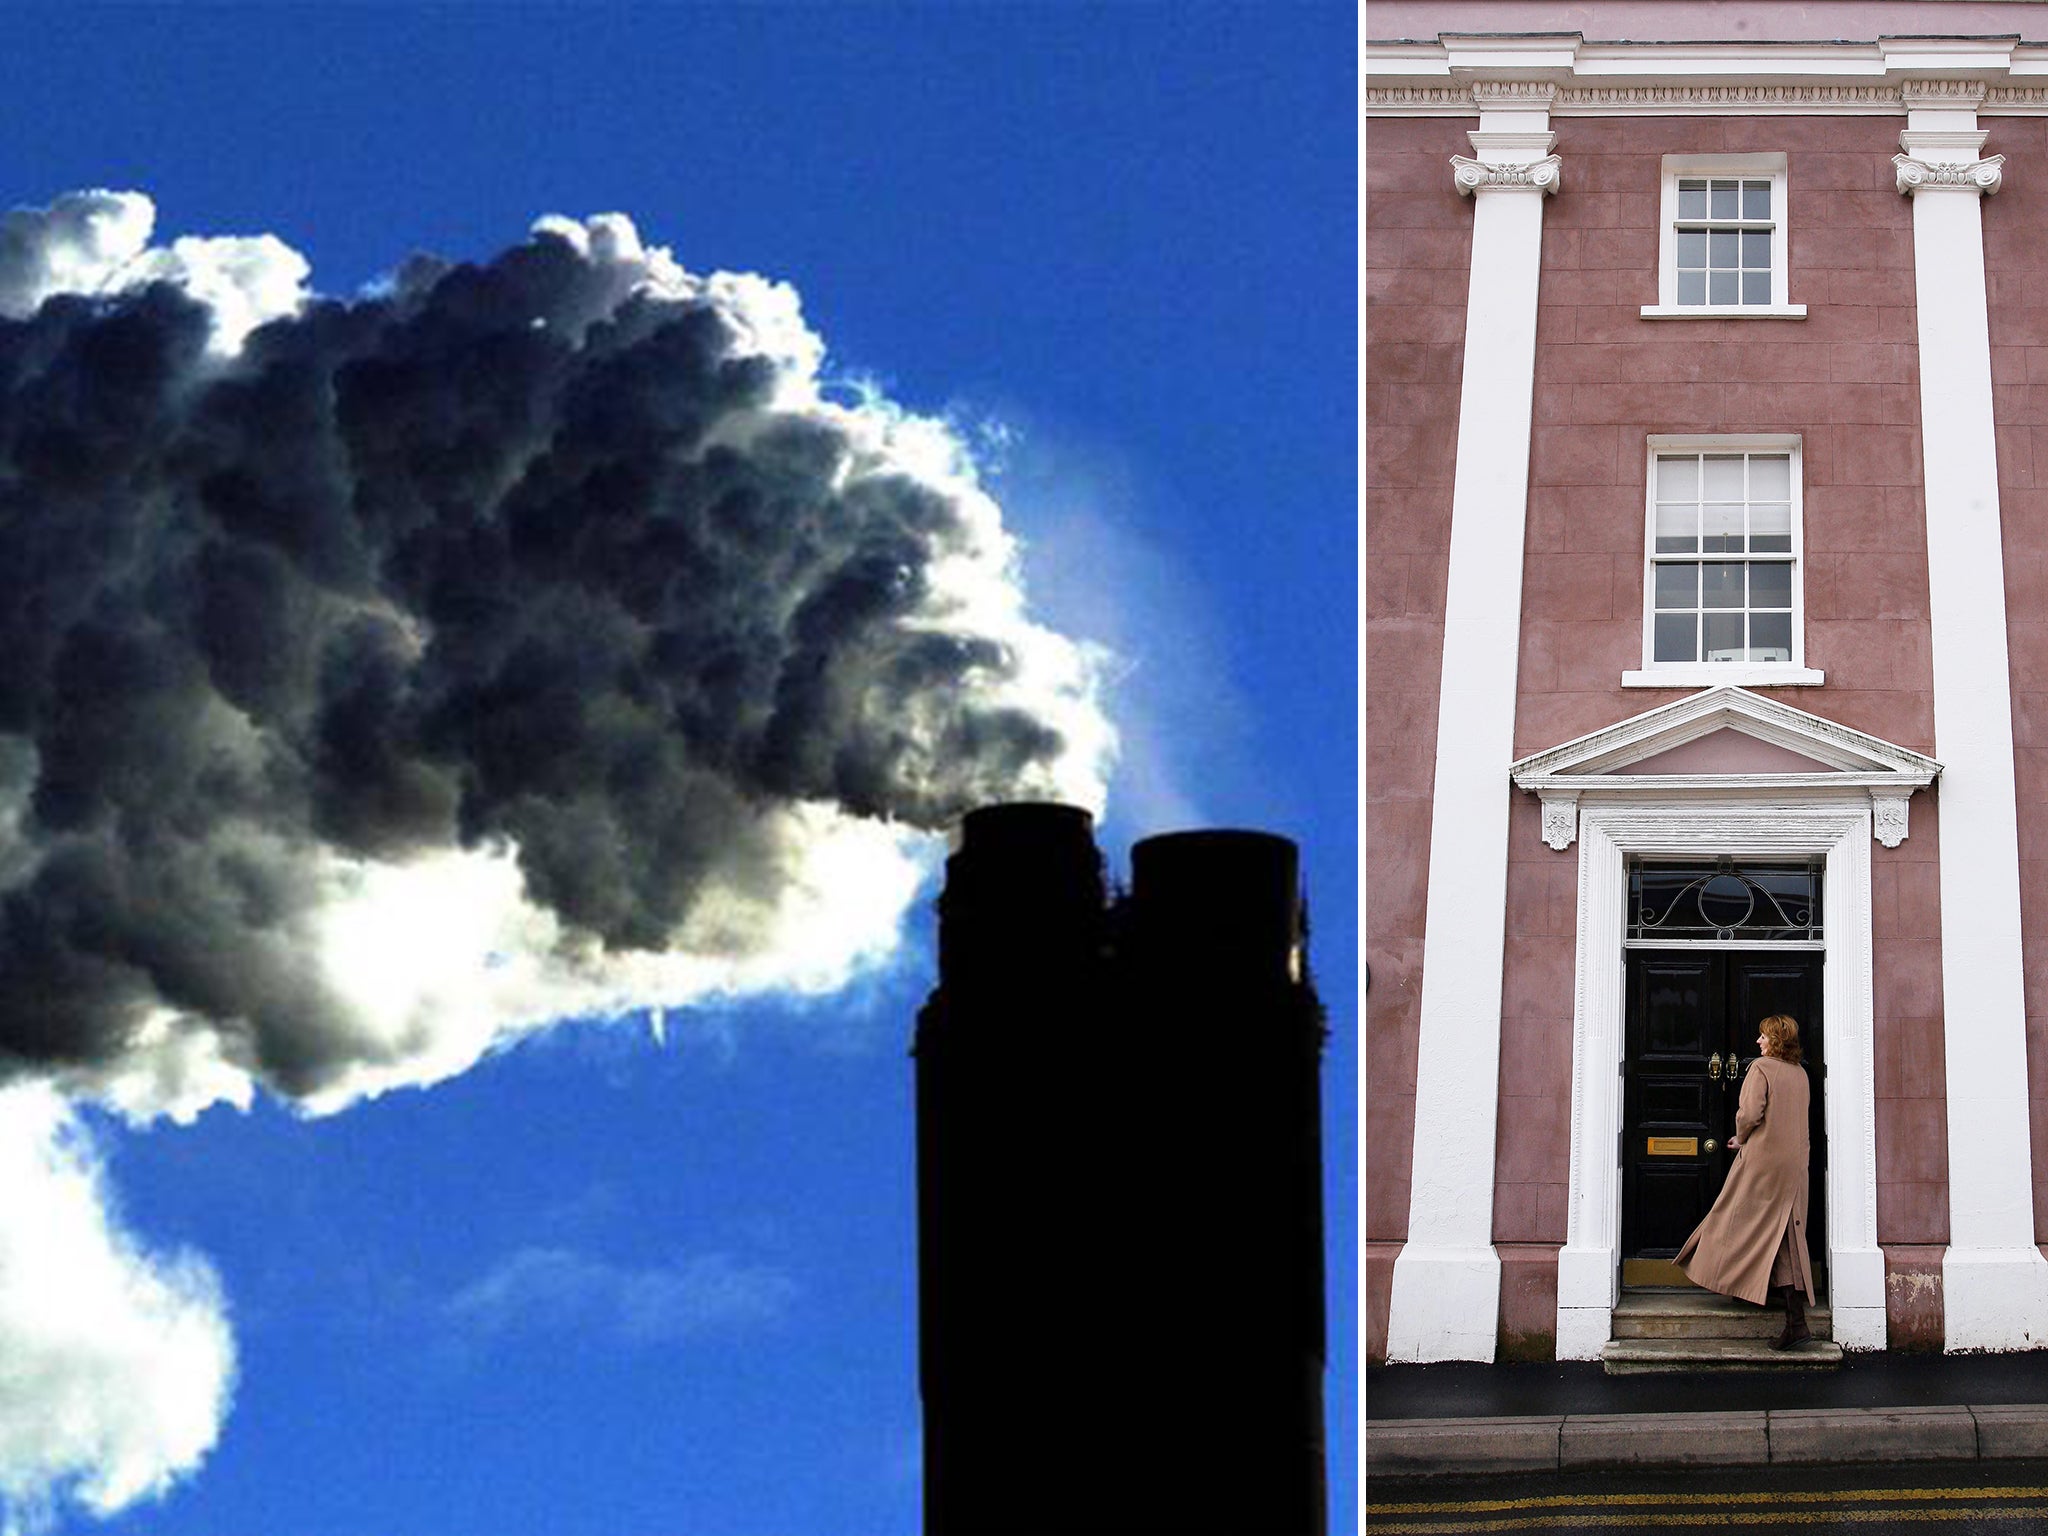 The University of Buckingham is accused of spending too much time hunting for reasons not to worry about climate change